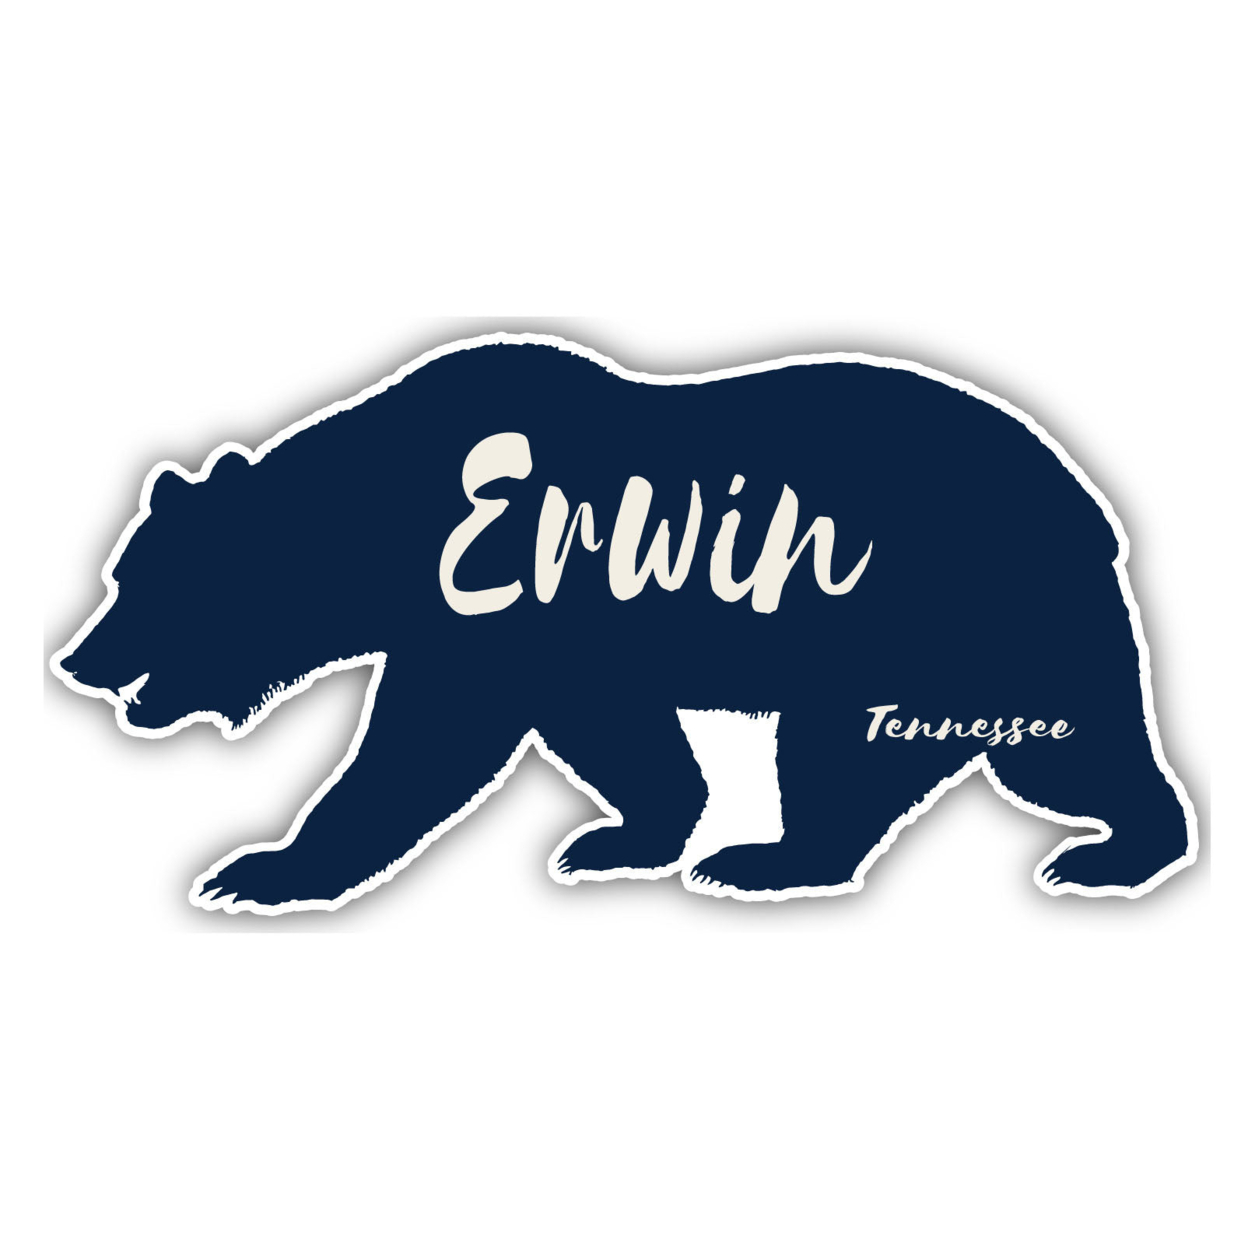 Erwin Tennessee Souvenir Decorative Stickers (Choose Theme And Size) - 4-Pack, 10-Inch, Bear